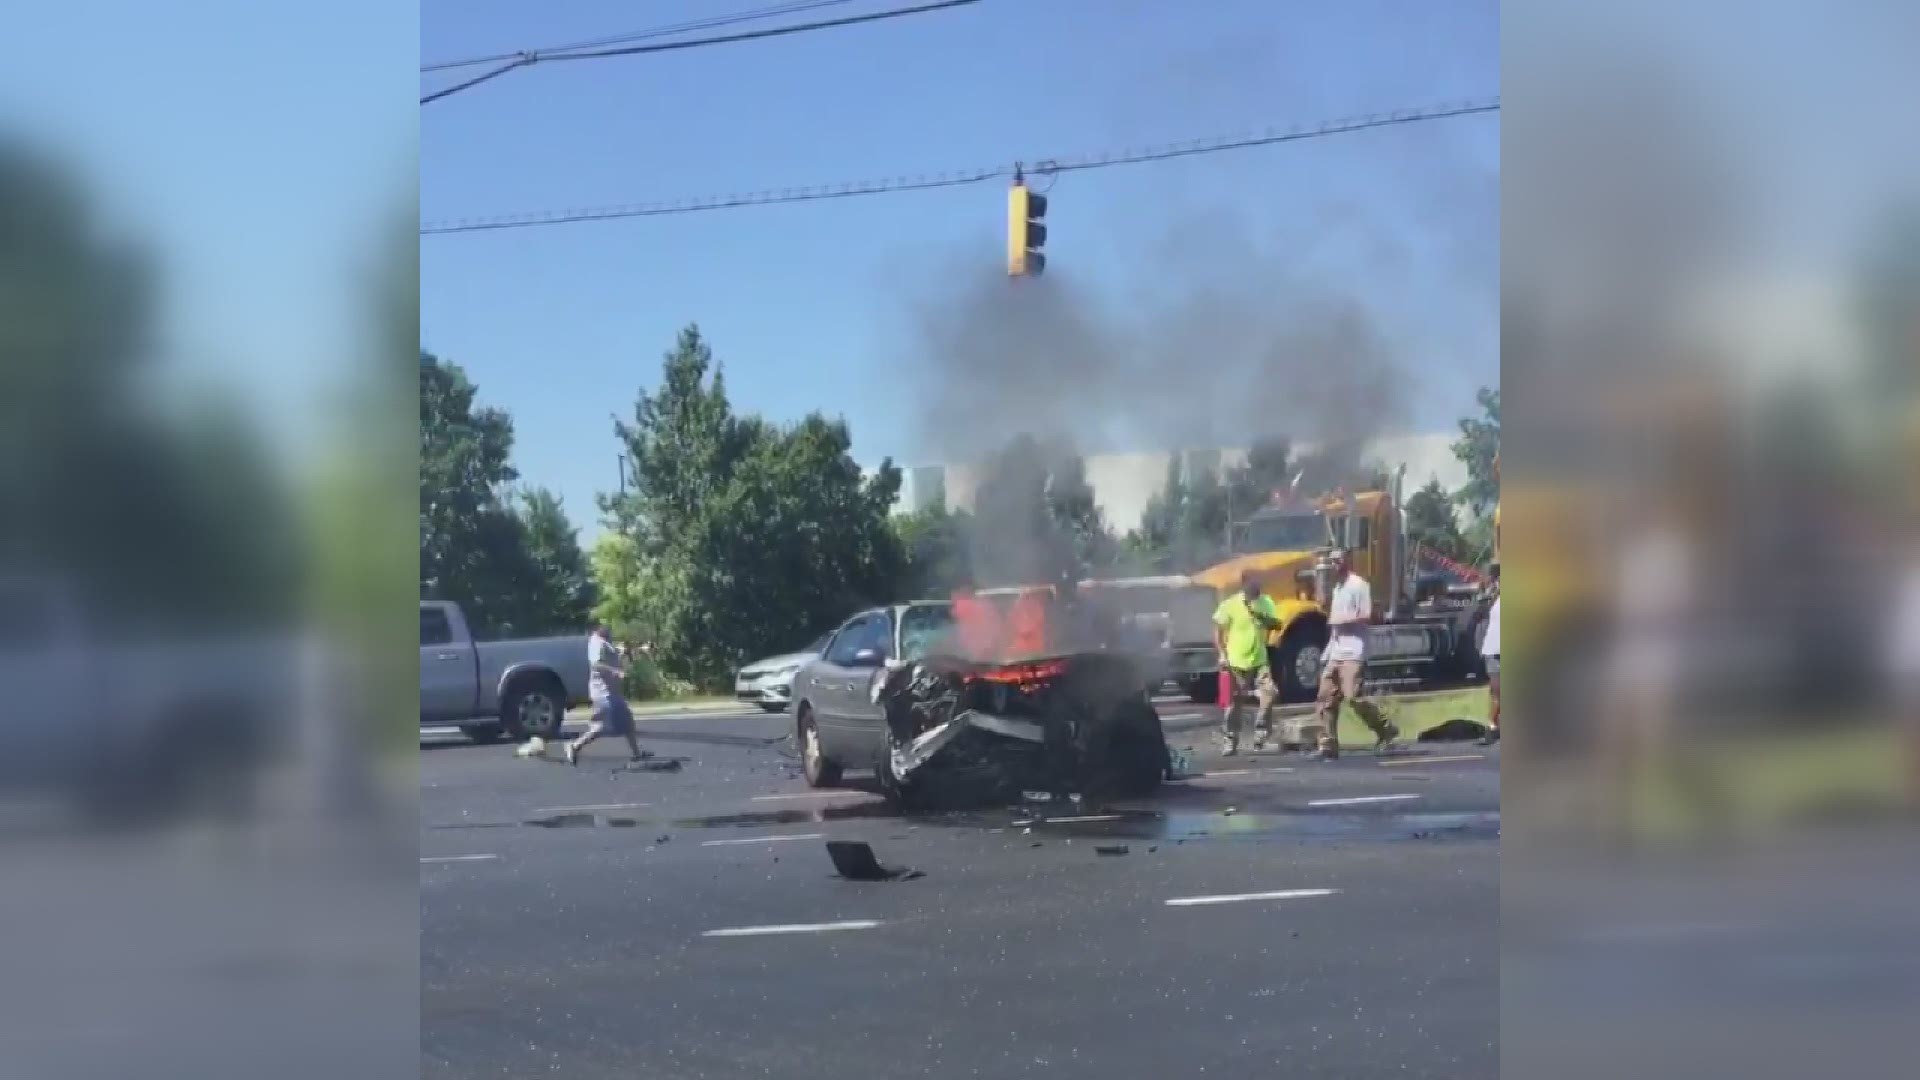 A person was saved from a burning car after a crash on Suitland Parkway in Prince George's County, Maryland. Bystanders can be seen pulling someone out of the car.